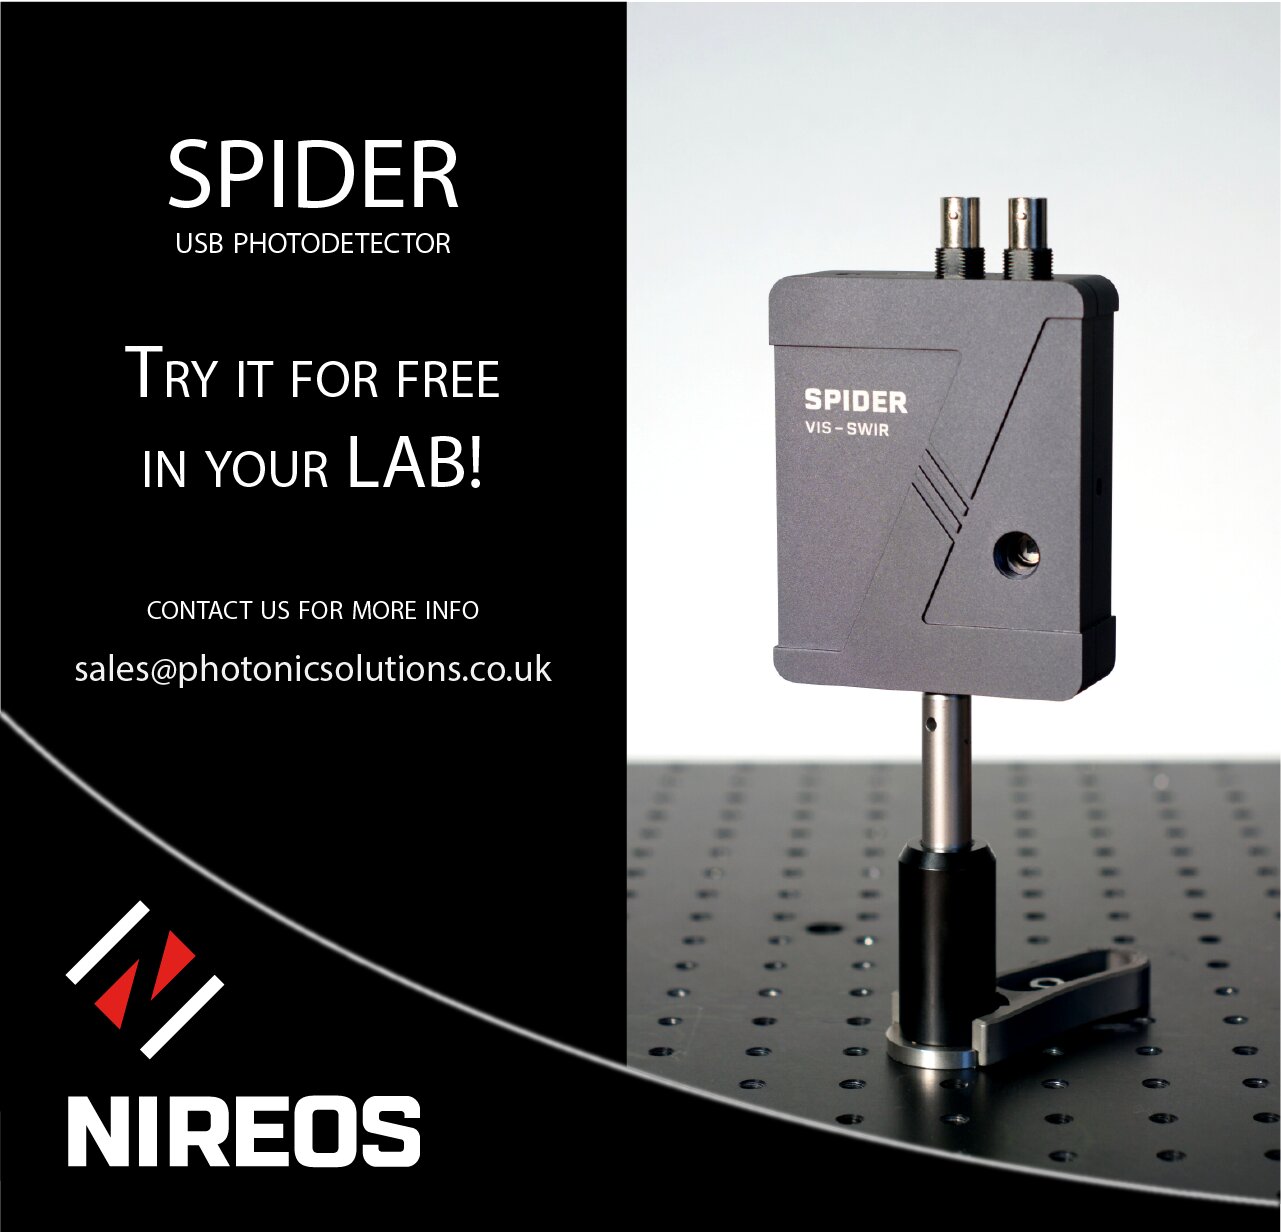 Try the NIREOS SPIDER photodetector in your lab today